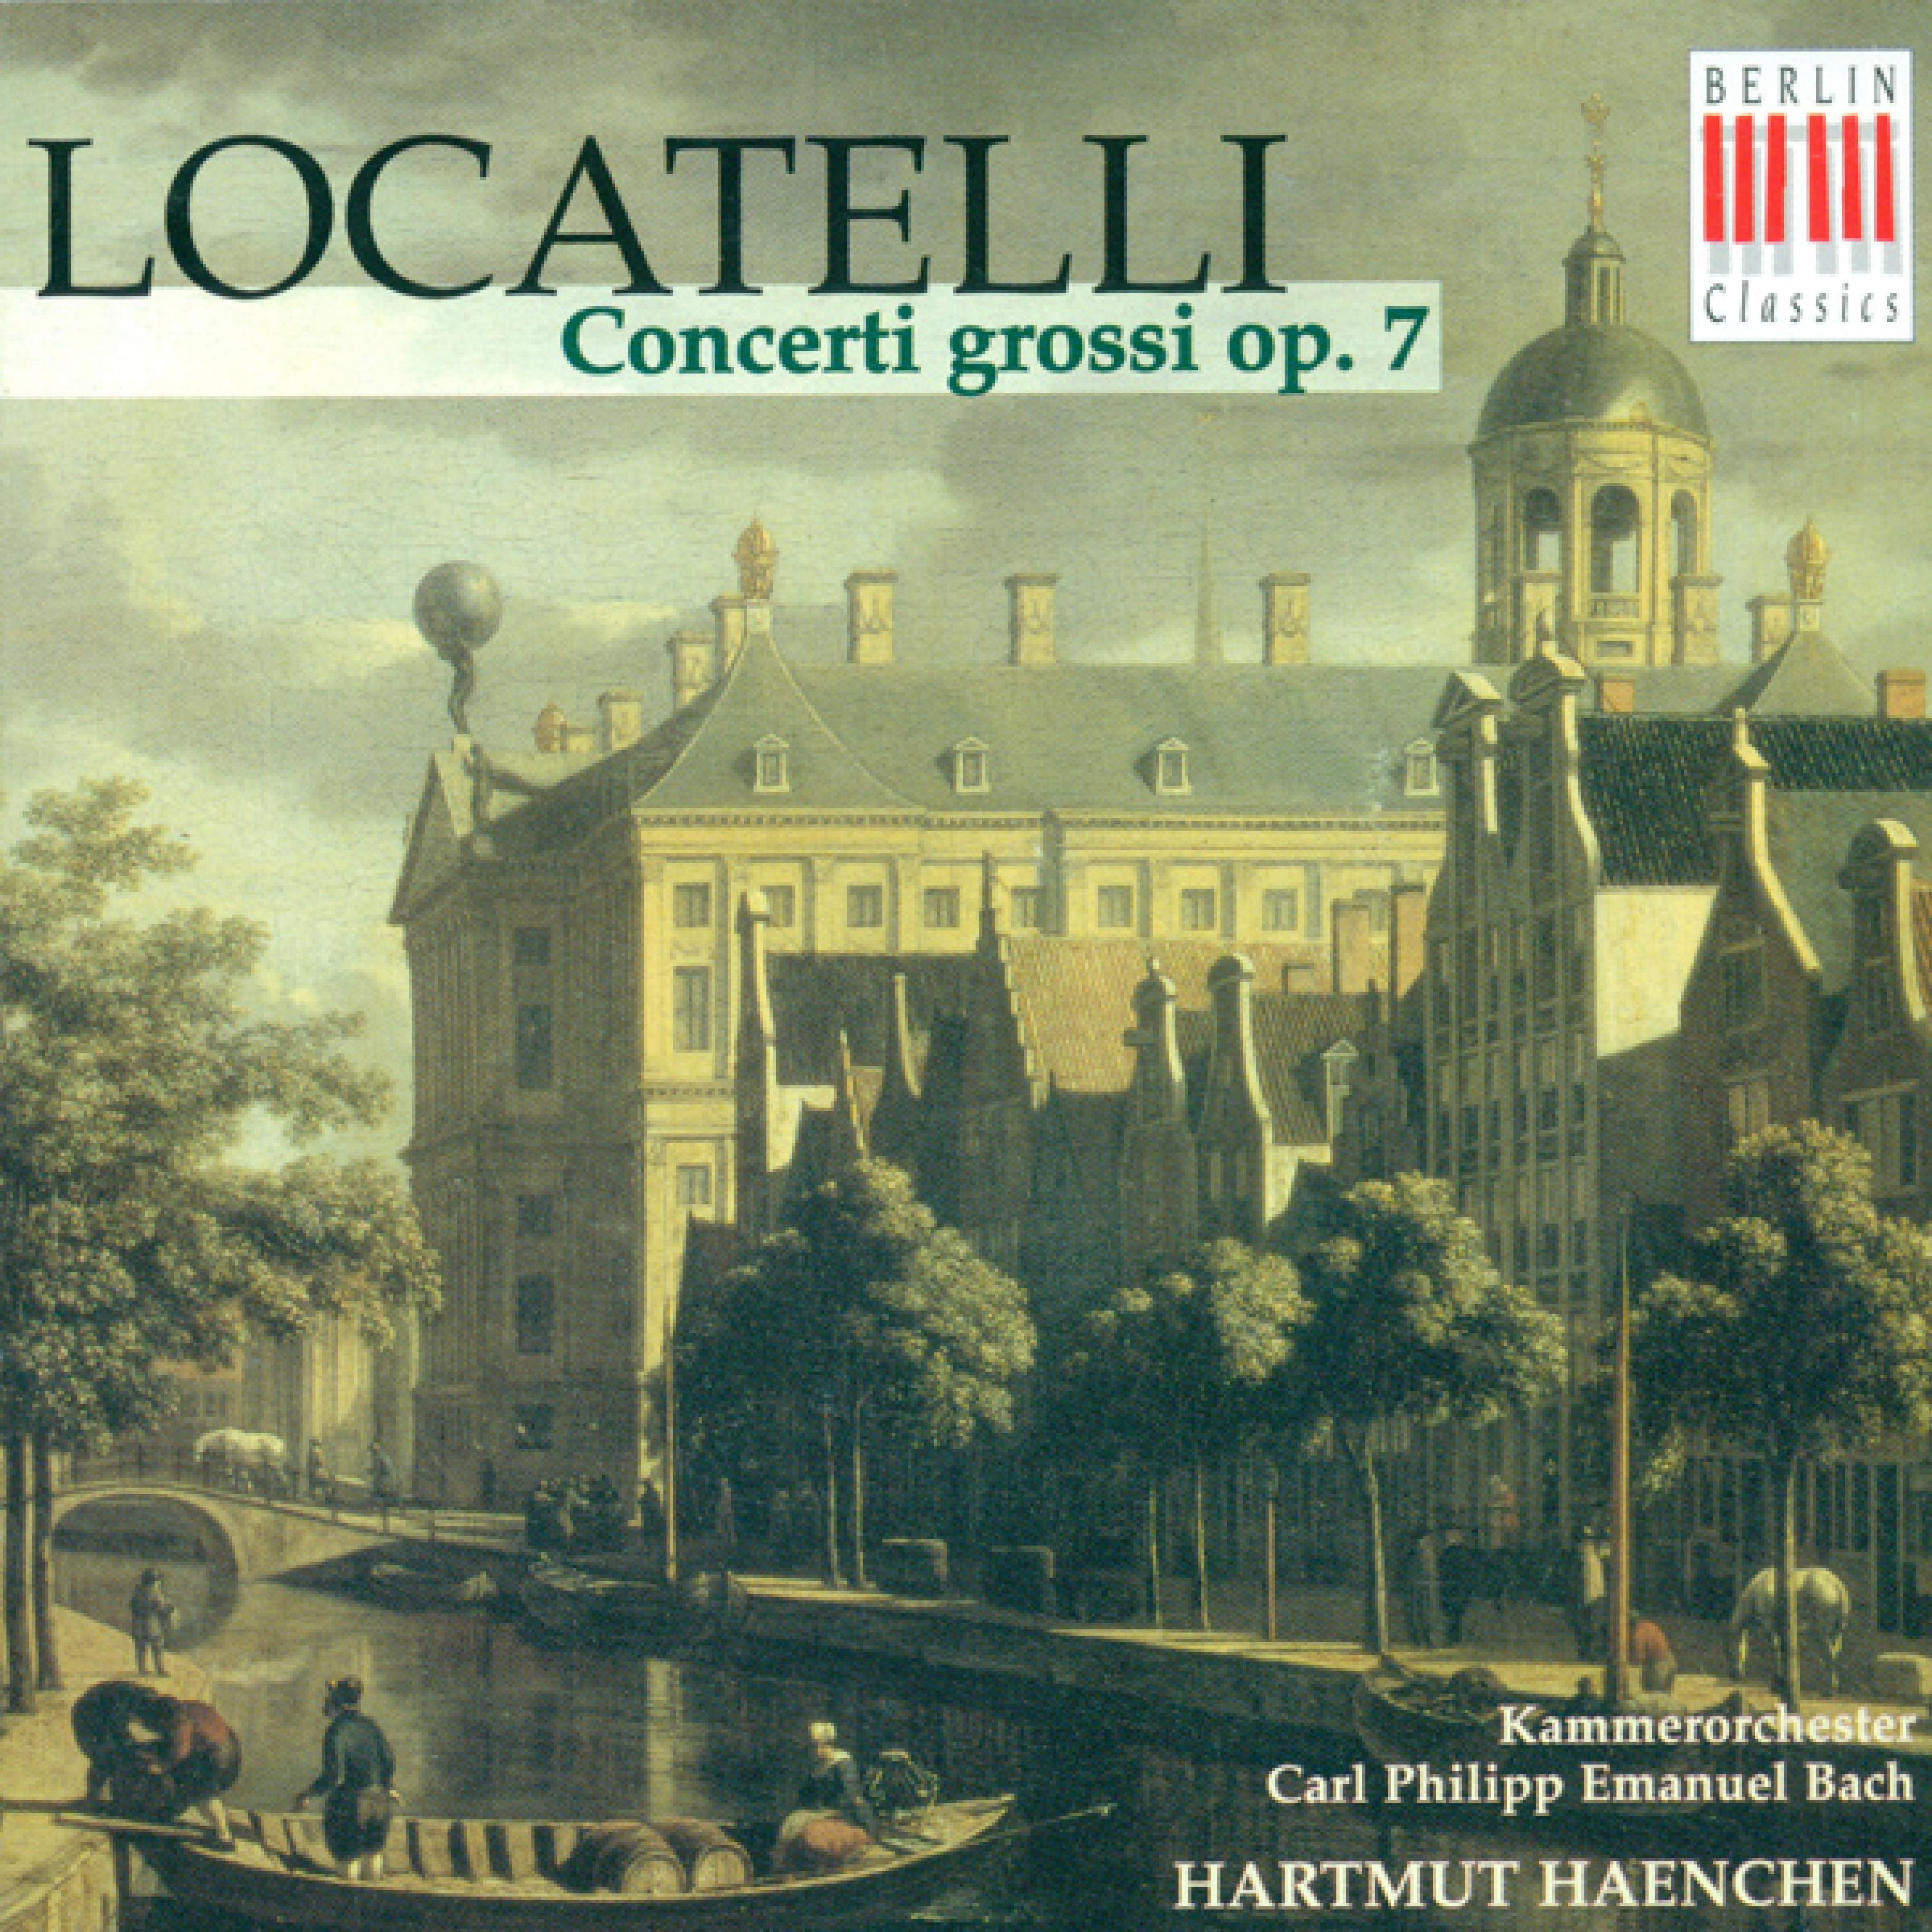 Concerto Grosso in B-Flat Major, Op. 7/2: I. Andante